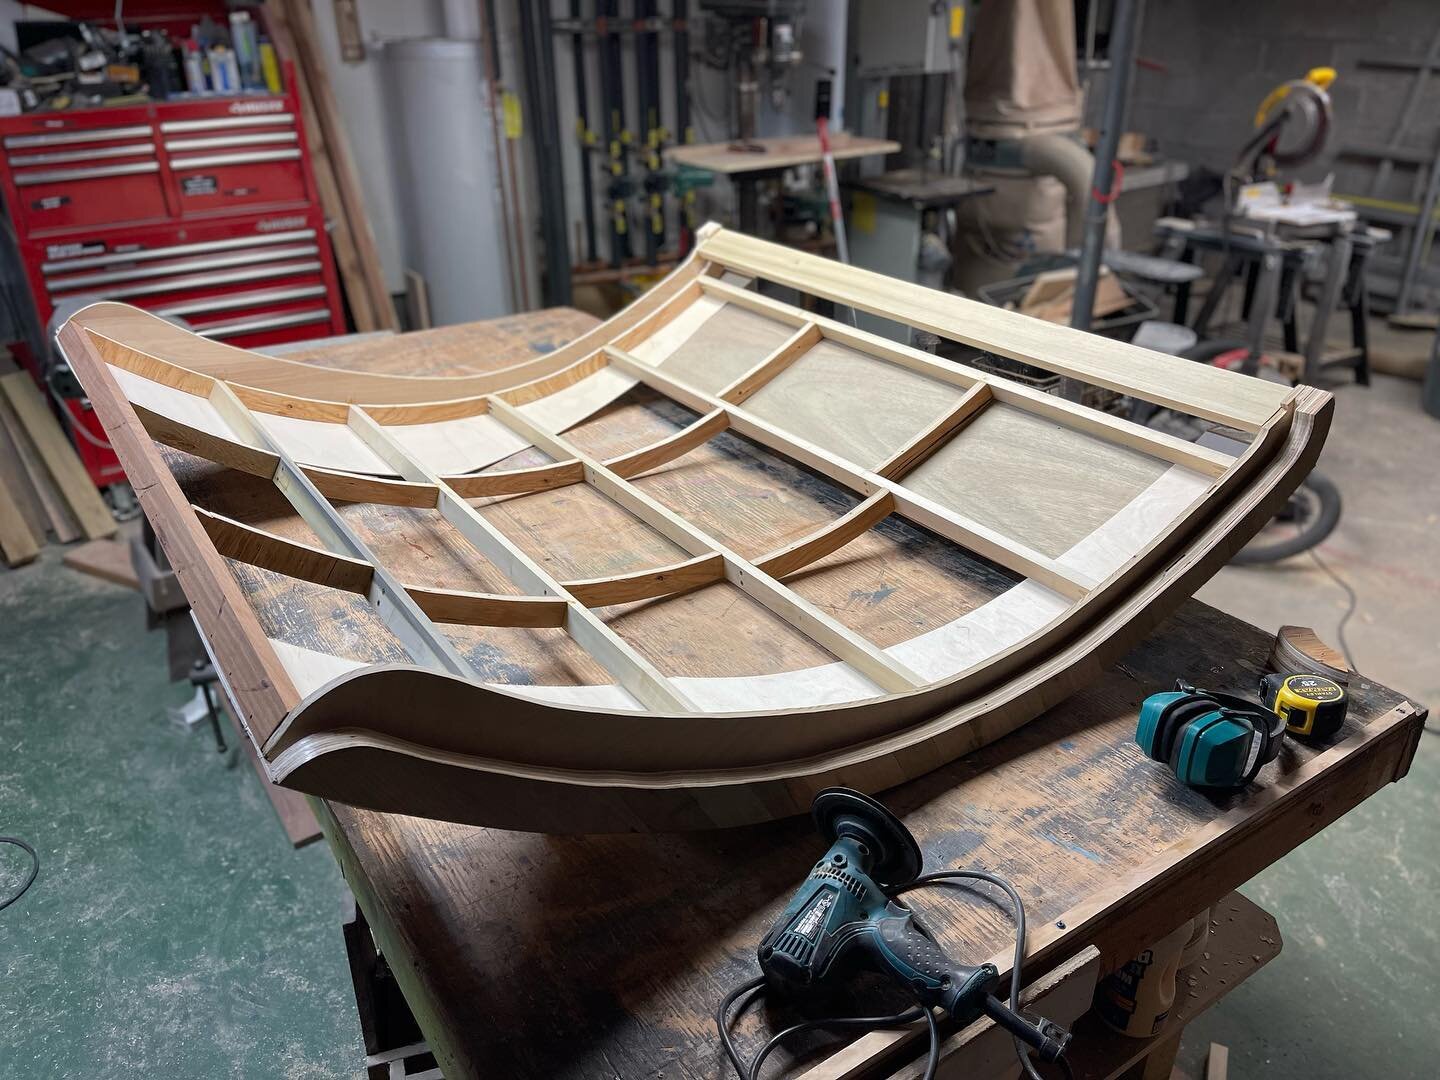 Slow and steady hatch progress. 

Got the framing done and the interior skin on. Skin is 1/8&rdquo; baltic birch attached with PL premium and brad nails. 

&hellip;

#teardropthalassa #teardrop #teardroptrailer #teardropcamper #teardroptrailers #tear